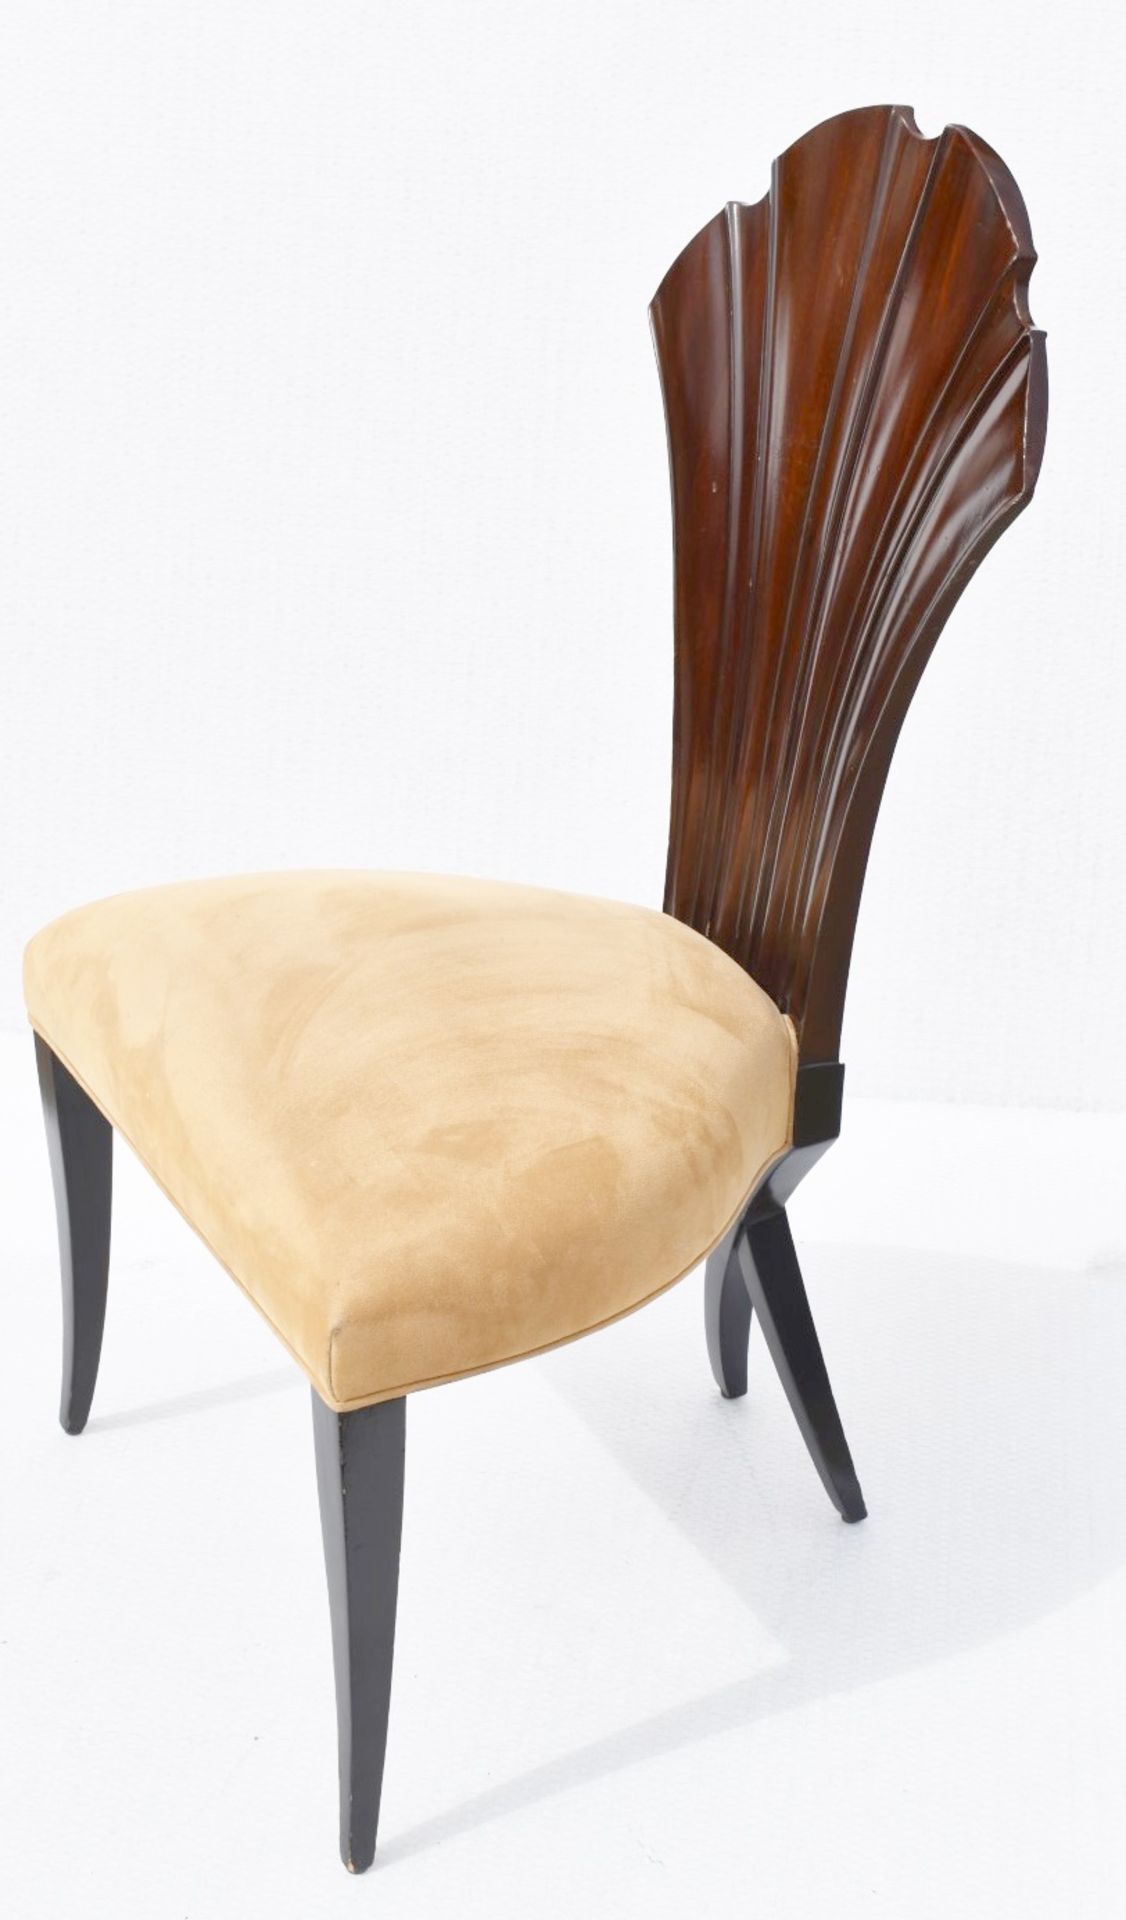 6 x CHRISTOPHER GUY 'La Croisette' Luxury Hand-carved Solid Mahogany Designer Dining Chairs - - Image 2 of 11